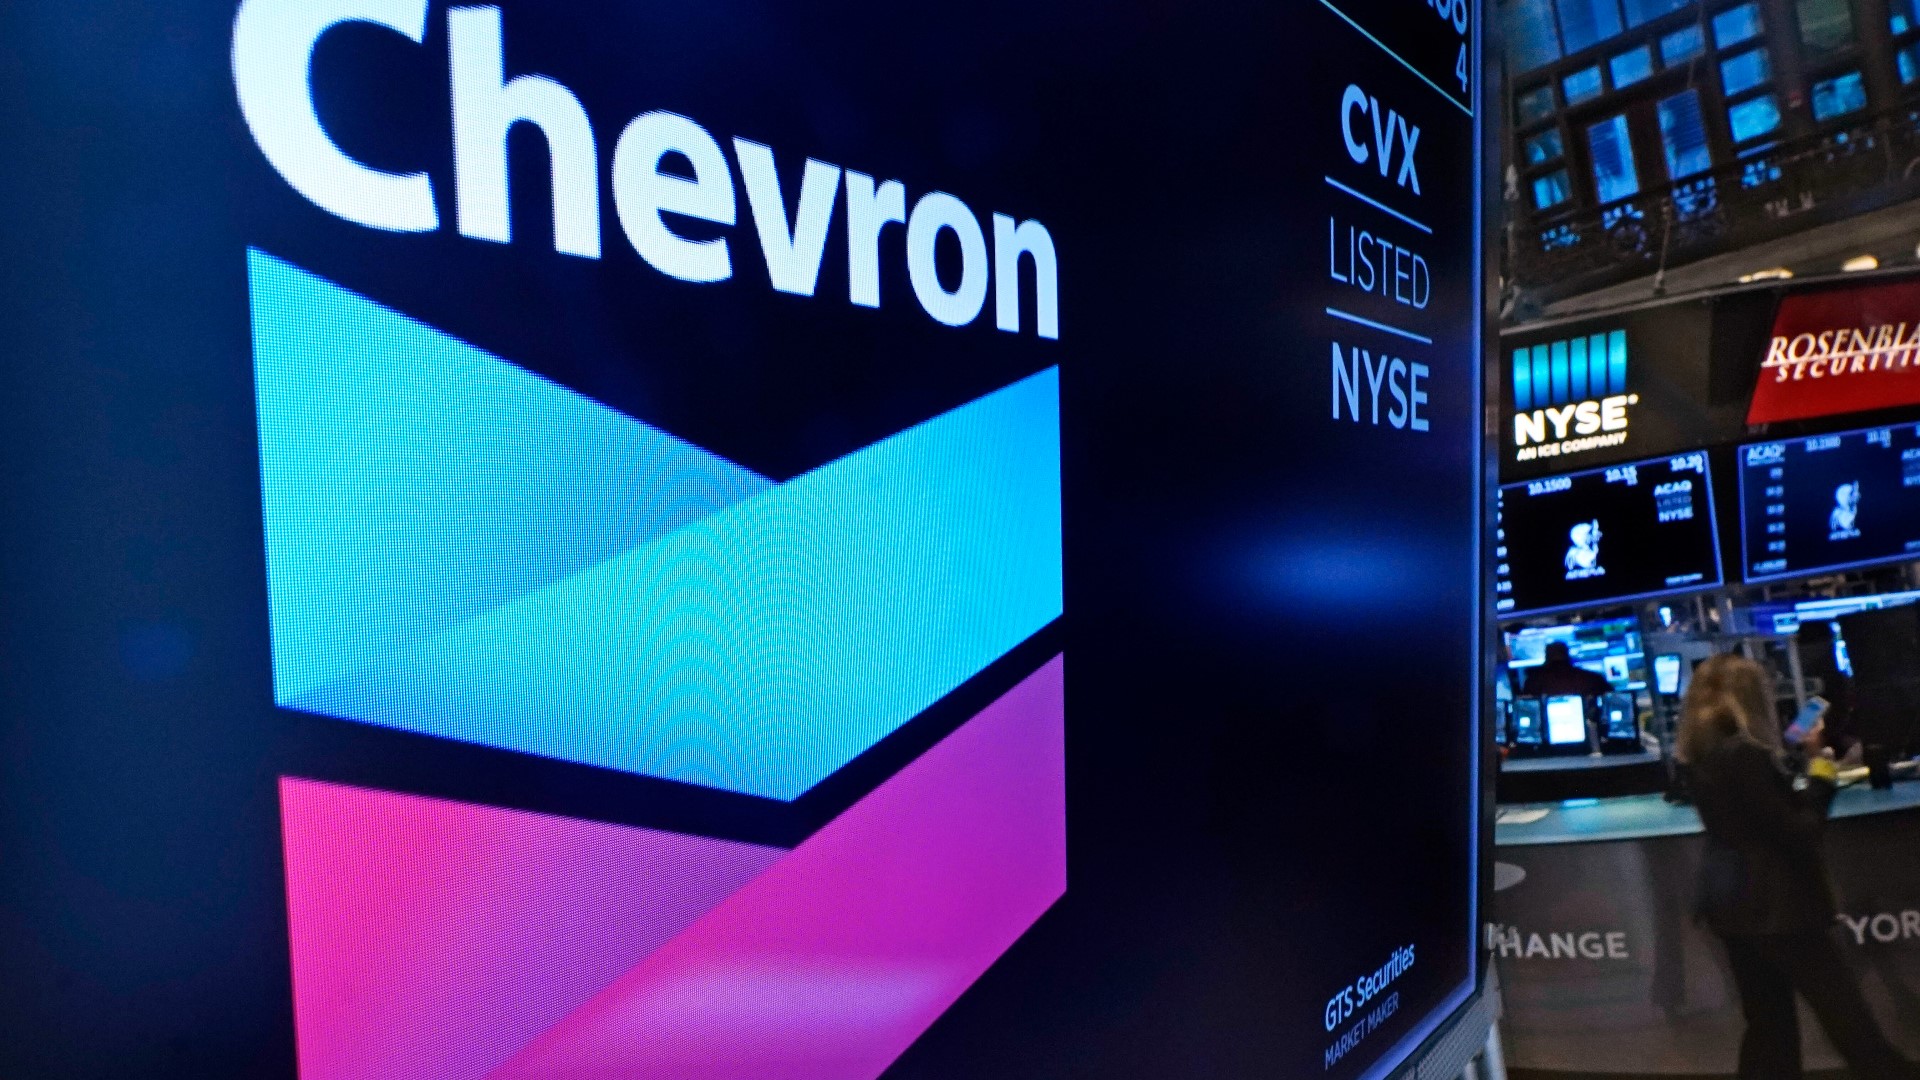 Chevron says the company's headquarters will remain in California, but those willing to move to Texas will be compensated to do so.